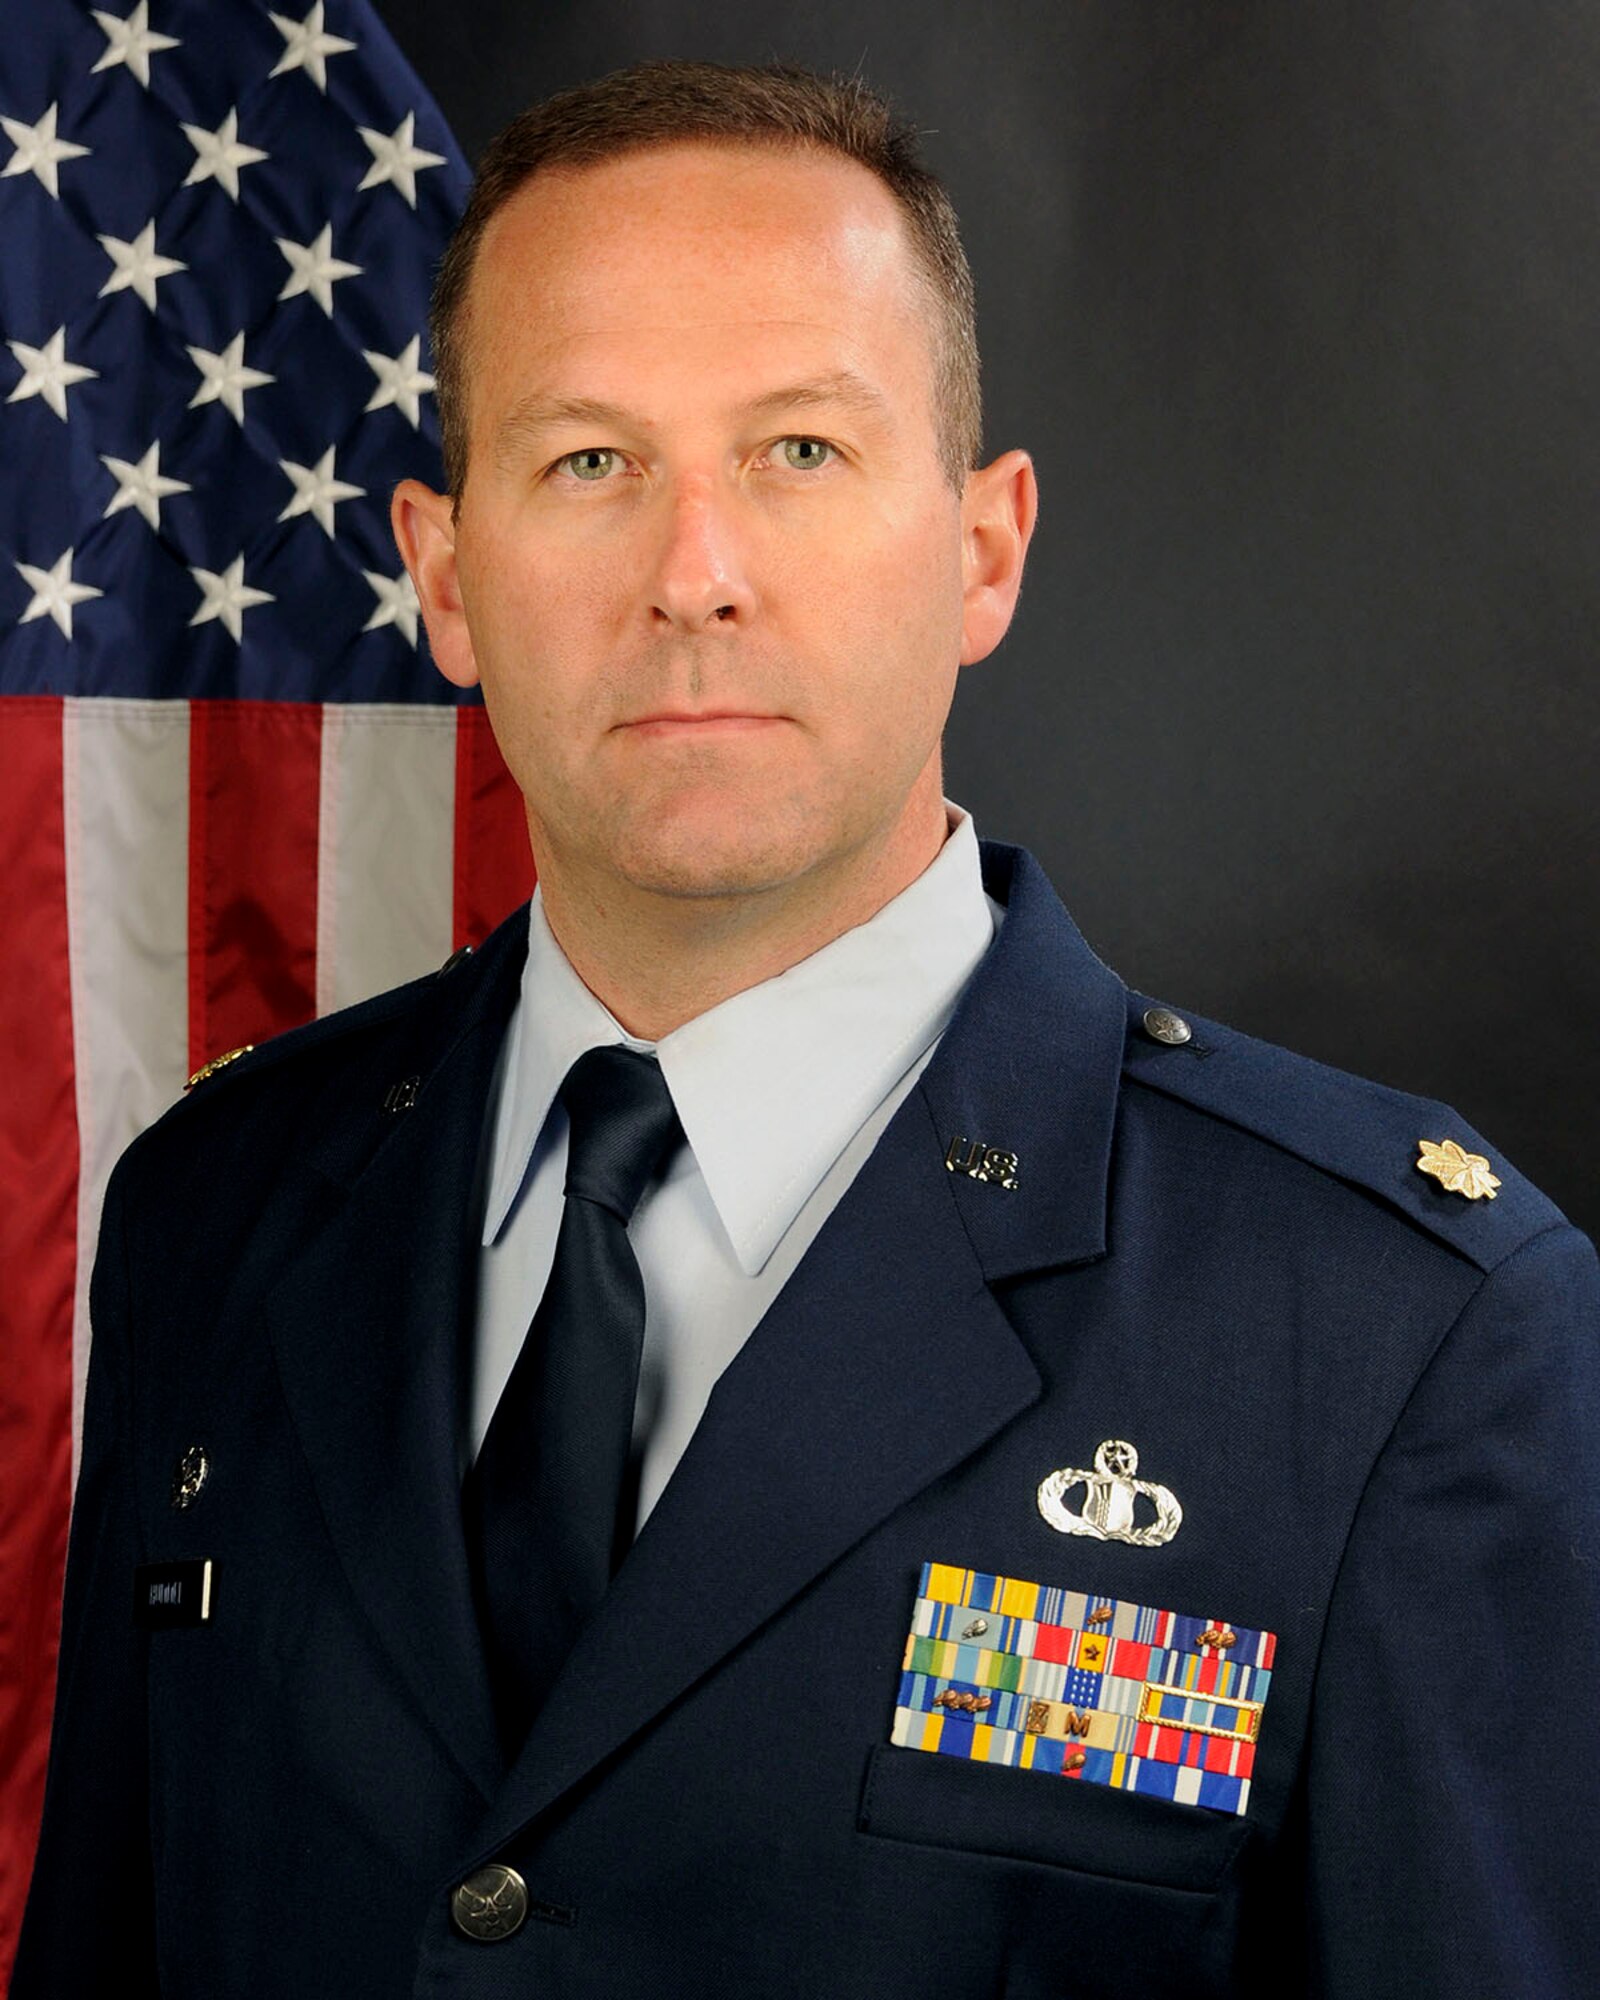 U.S. Air Force Maj. Walter Hummel, commander of the 245th Air Traffic Control Squadron at McEntire Joint National Guard Base, South Carolina Air National Guard, poses for his portrait, March 5, 2014.  (U.S. Air National Guard photo by Tech. Sgt. Caycee Watson/Released)